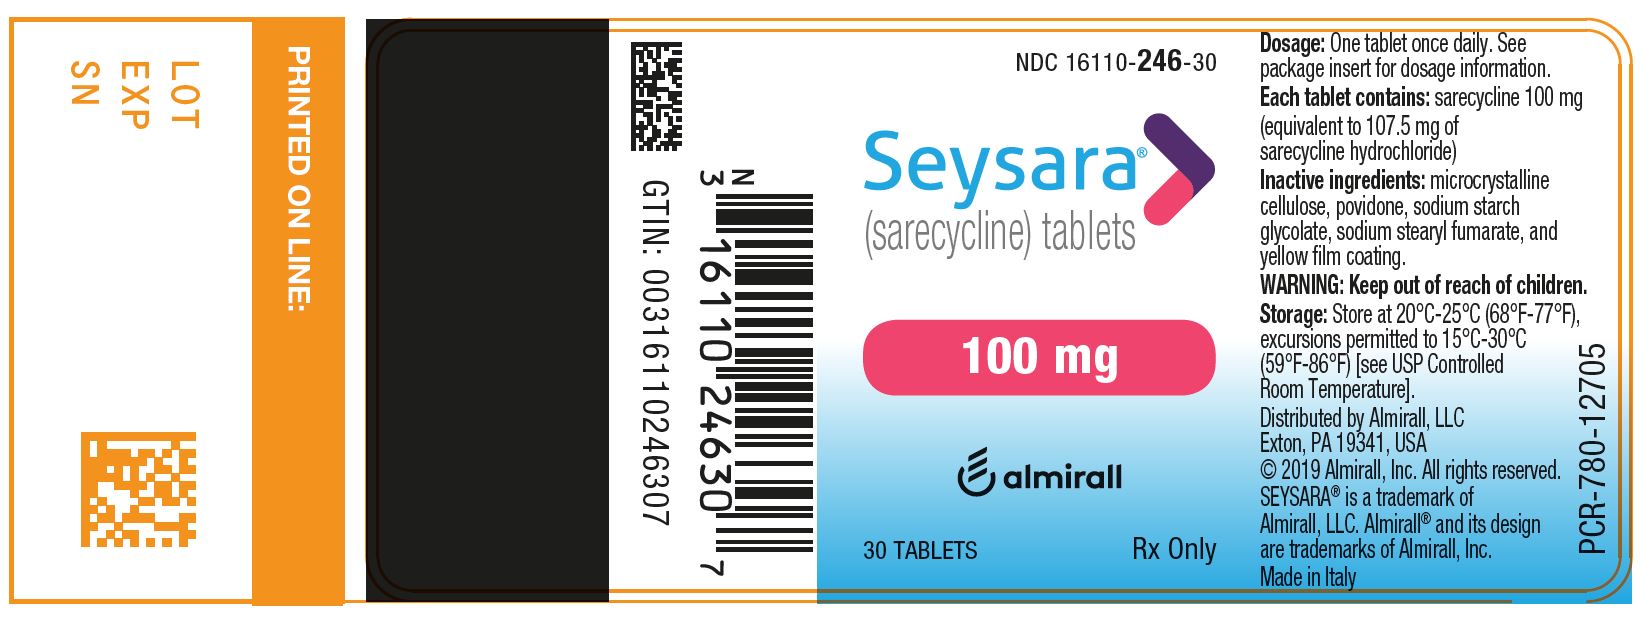 ndc-16110-246-seysara-images-packaging-labeling-appearance